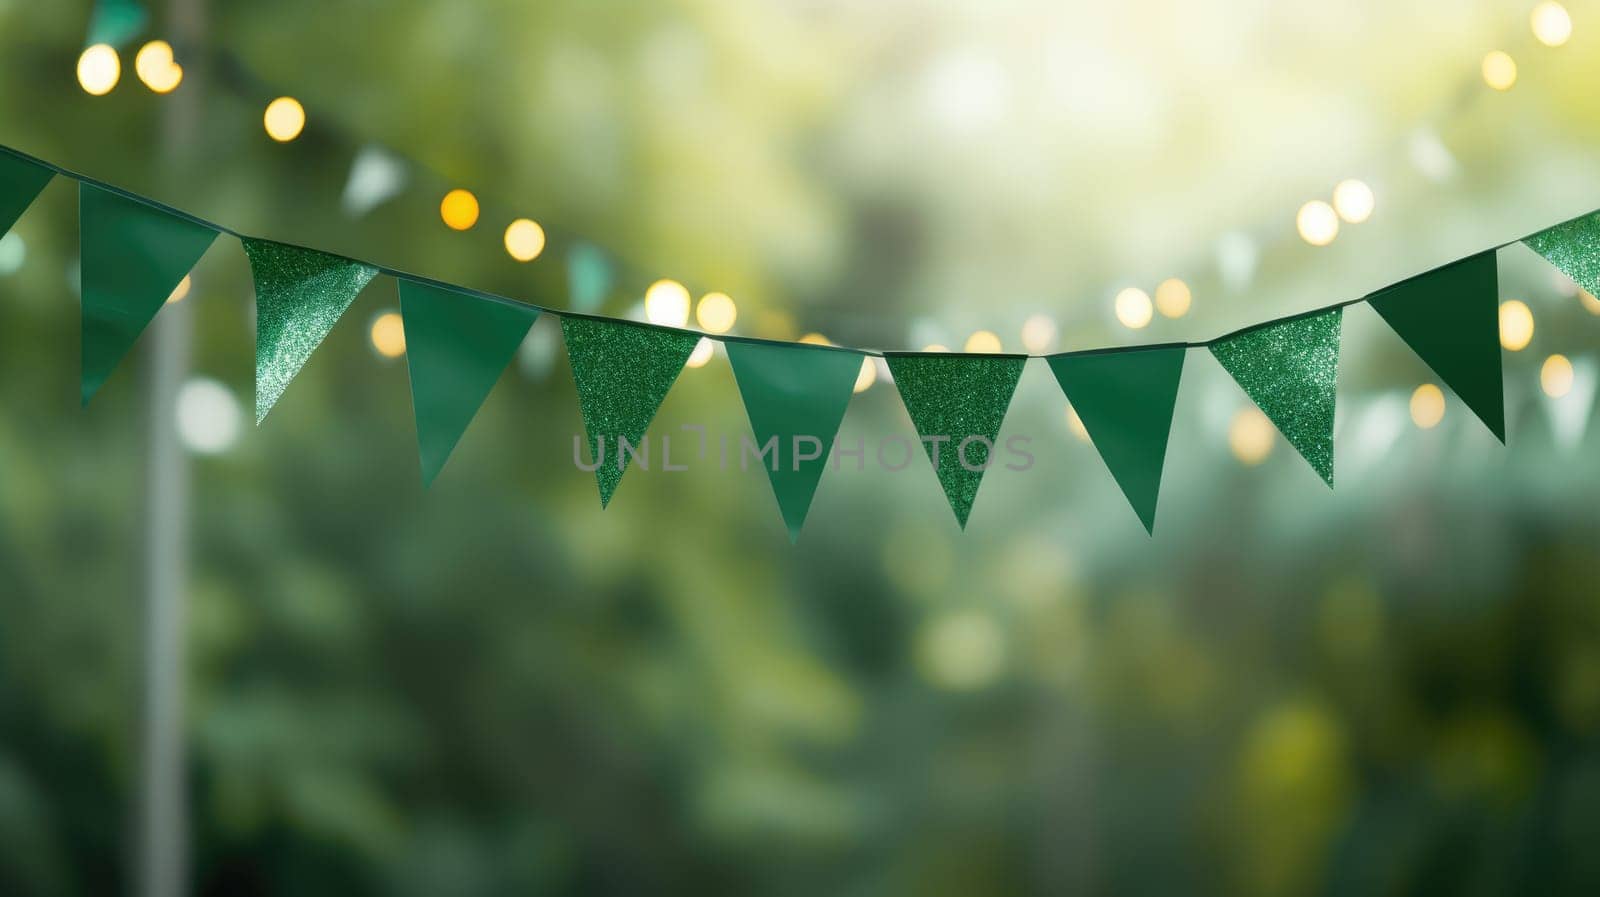 Green flags garland on a blurred background. Festive garland with lights. Outdoor Saint Patrick's Day party AI